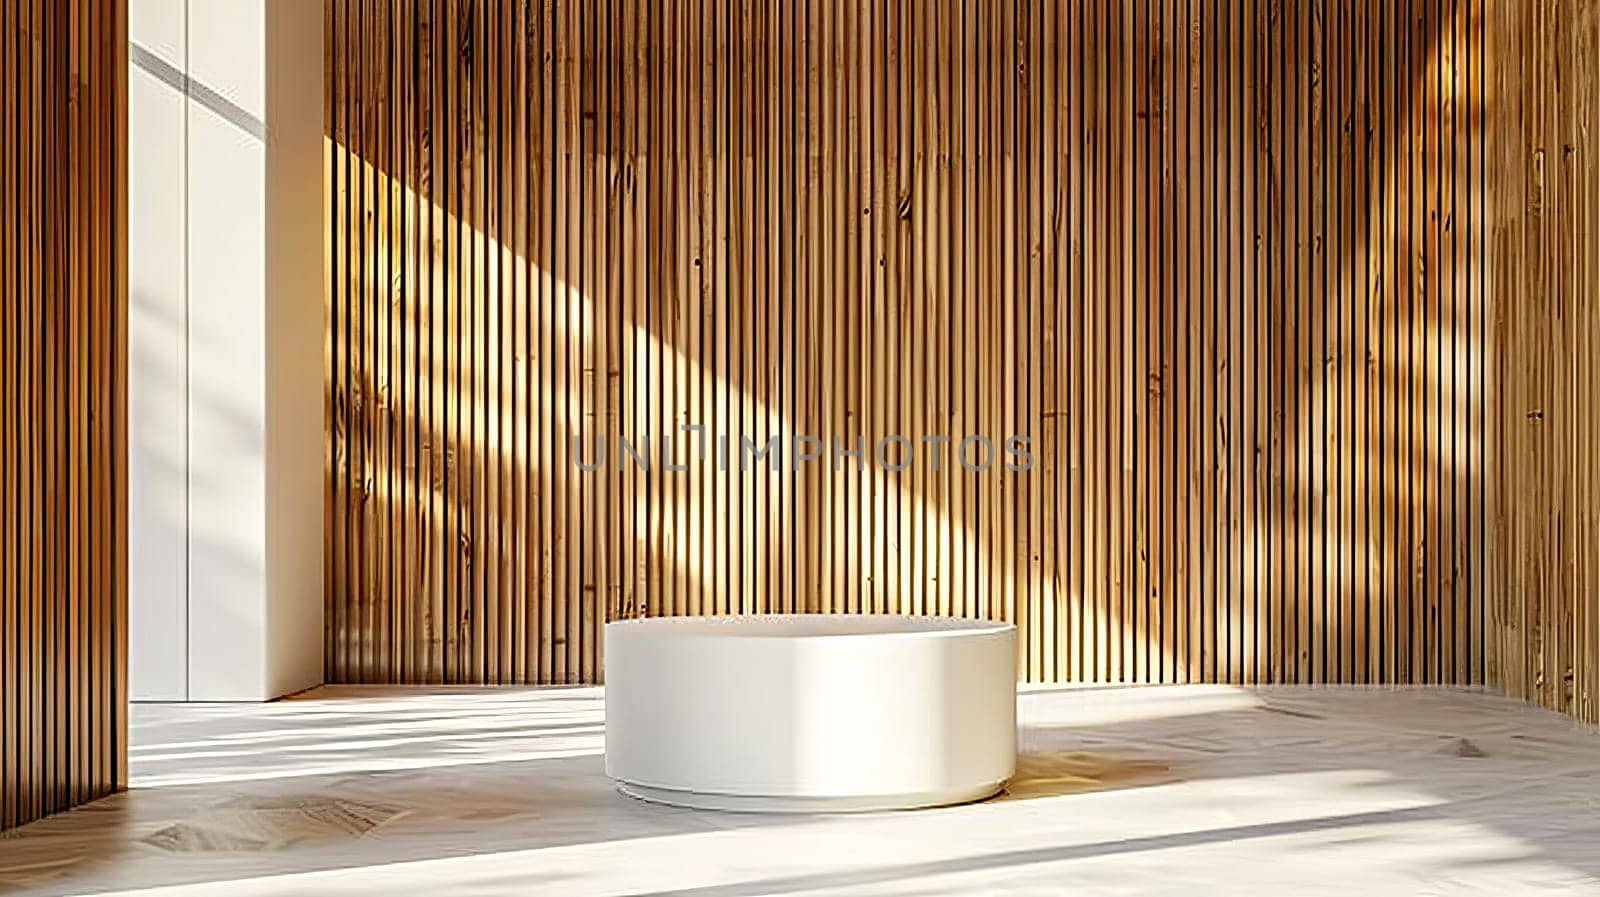 Natural wood grain panels combined with a white cylindrical podium. by OlgaGubskaya